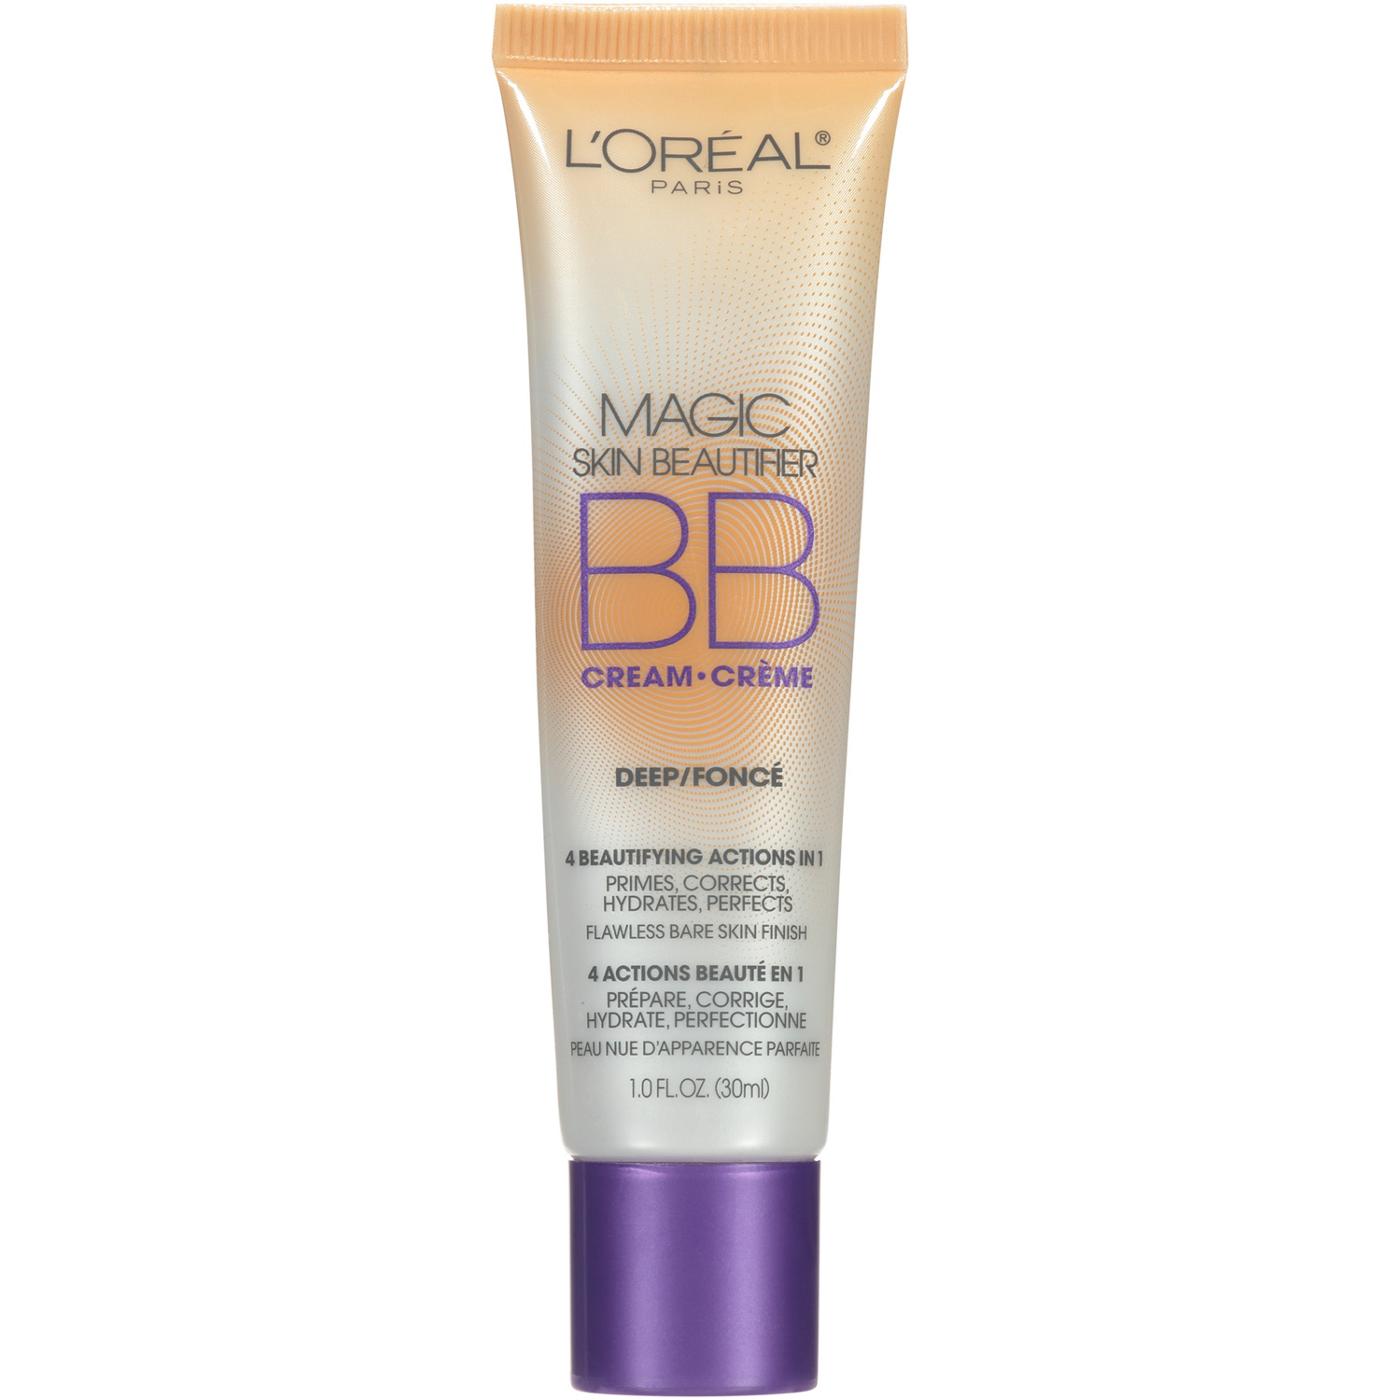 L'Oréal Paris Magic Skin Beautifier BB Cream for Face with Vitamin C and E - Deep; image 1 of 3